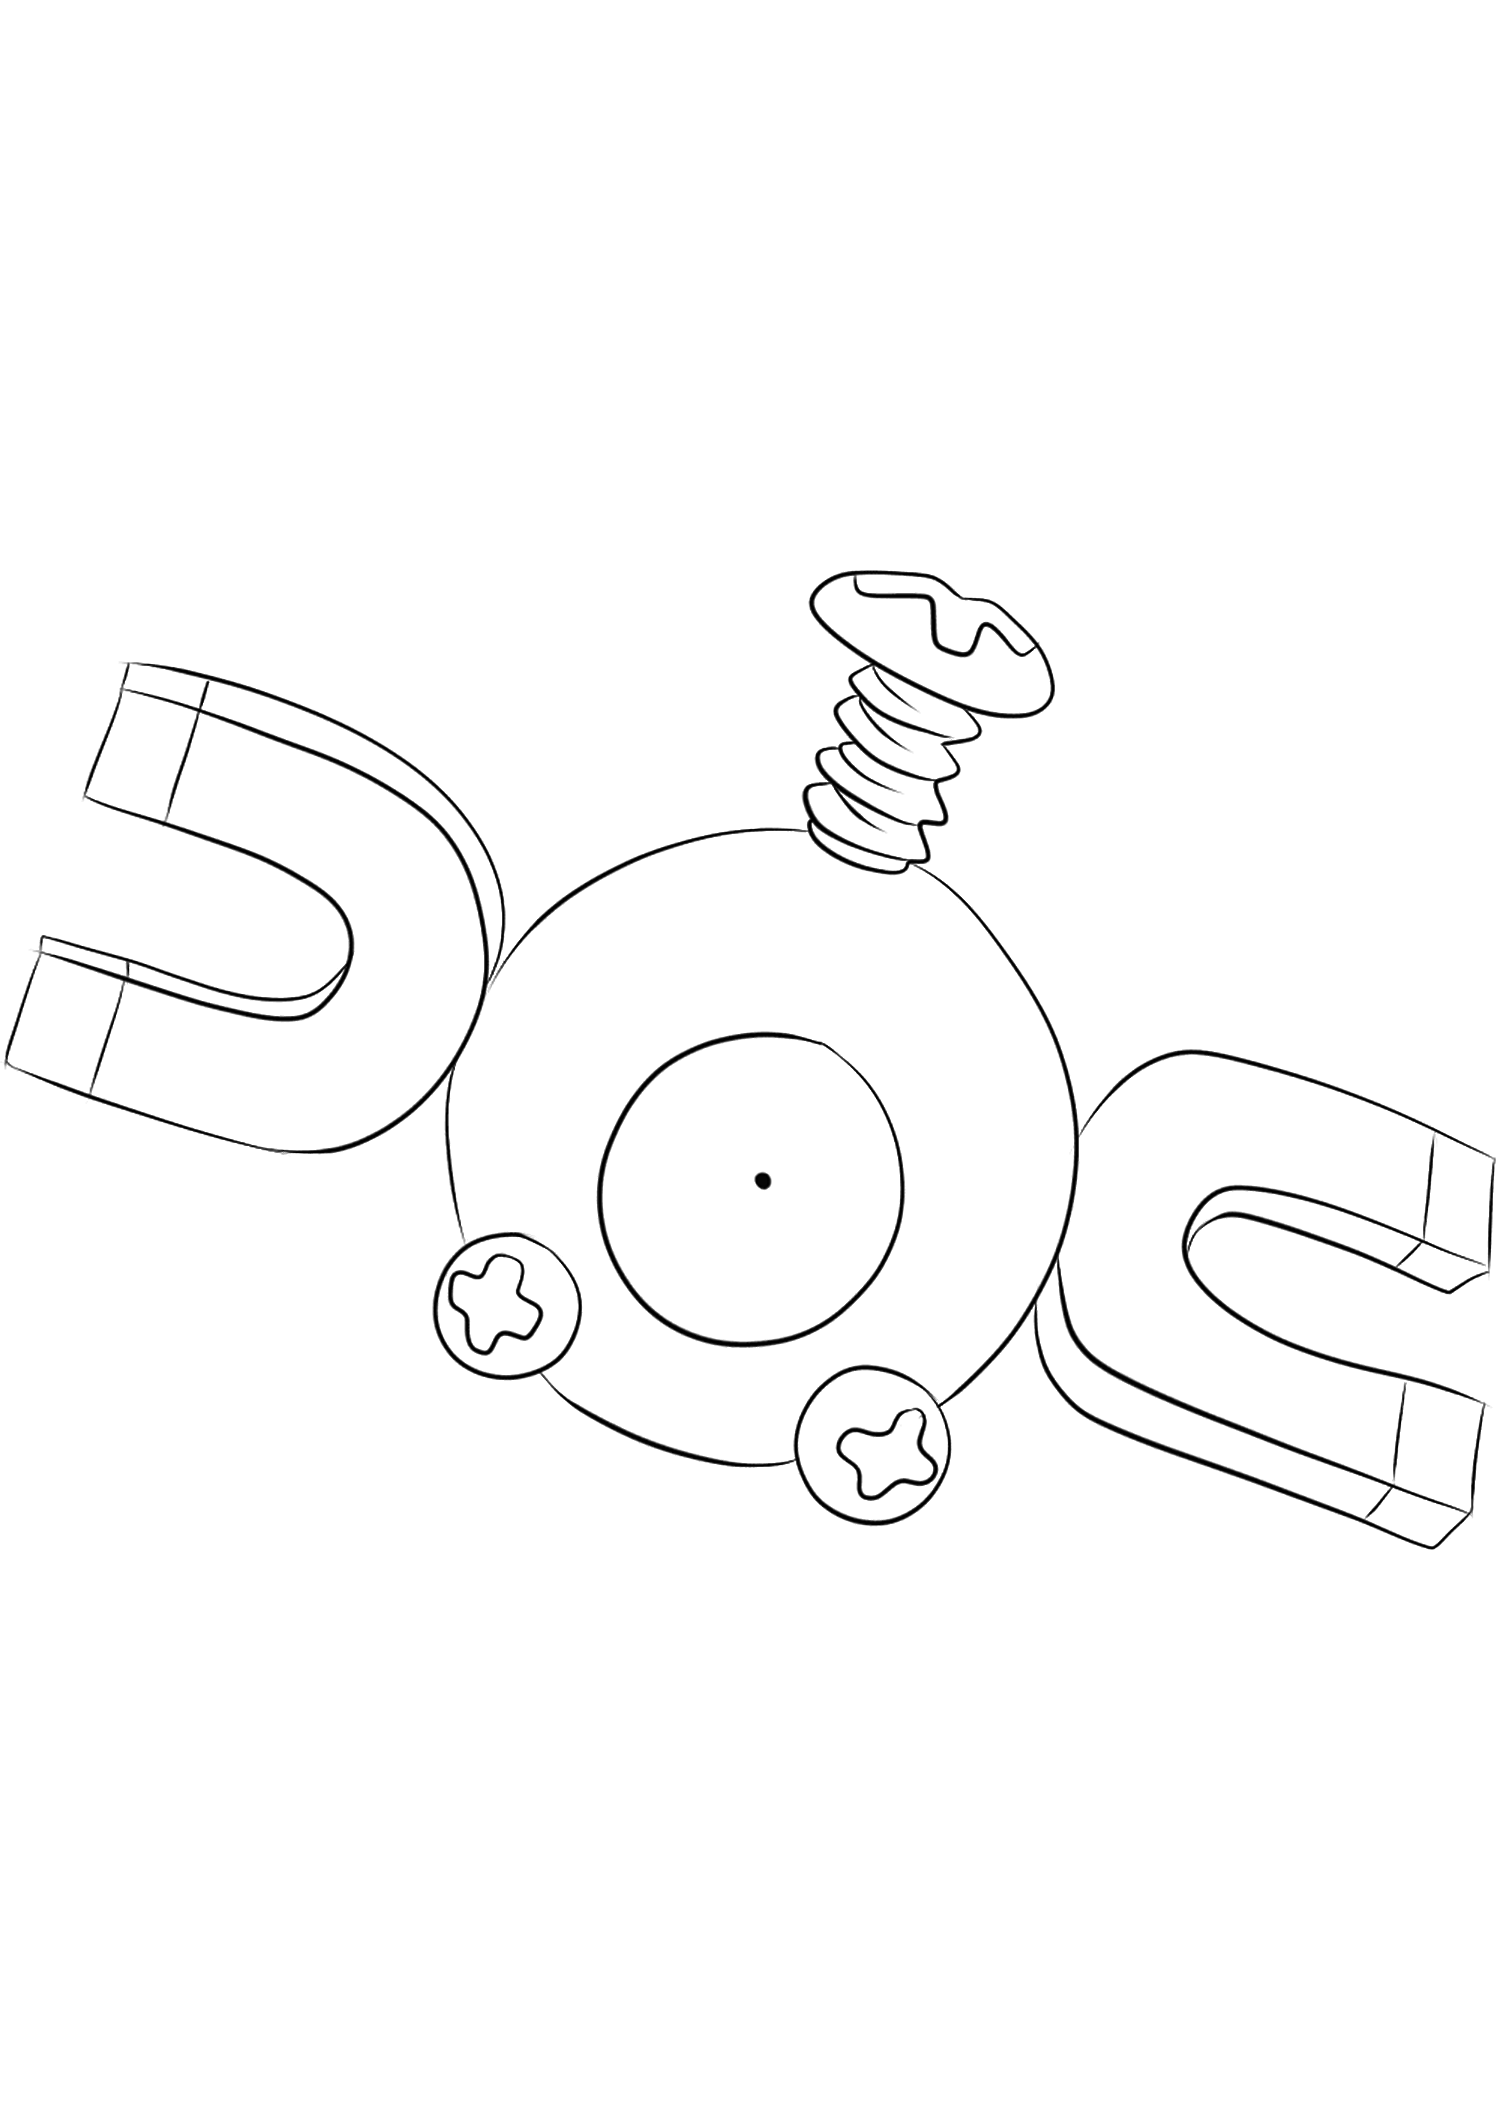 Magnemite (No.81). Magnemite Coloring page, Generation I Pokemon of type Electrik and SteelOriginal image credit: Pokemon linearts by Lilly Gerbil on Deviantart.Permission:  All rights reserved © Pokemon company and Ken Sugimori.